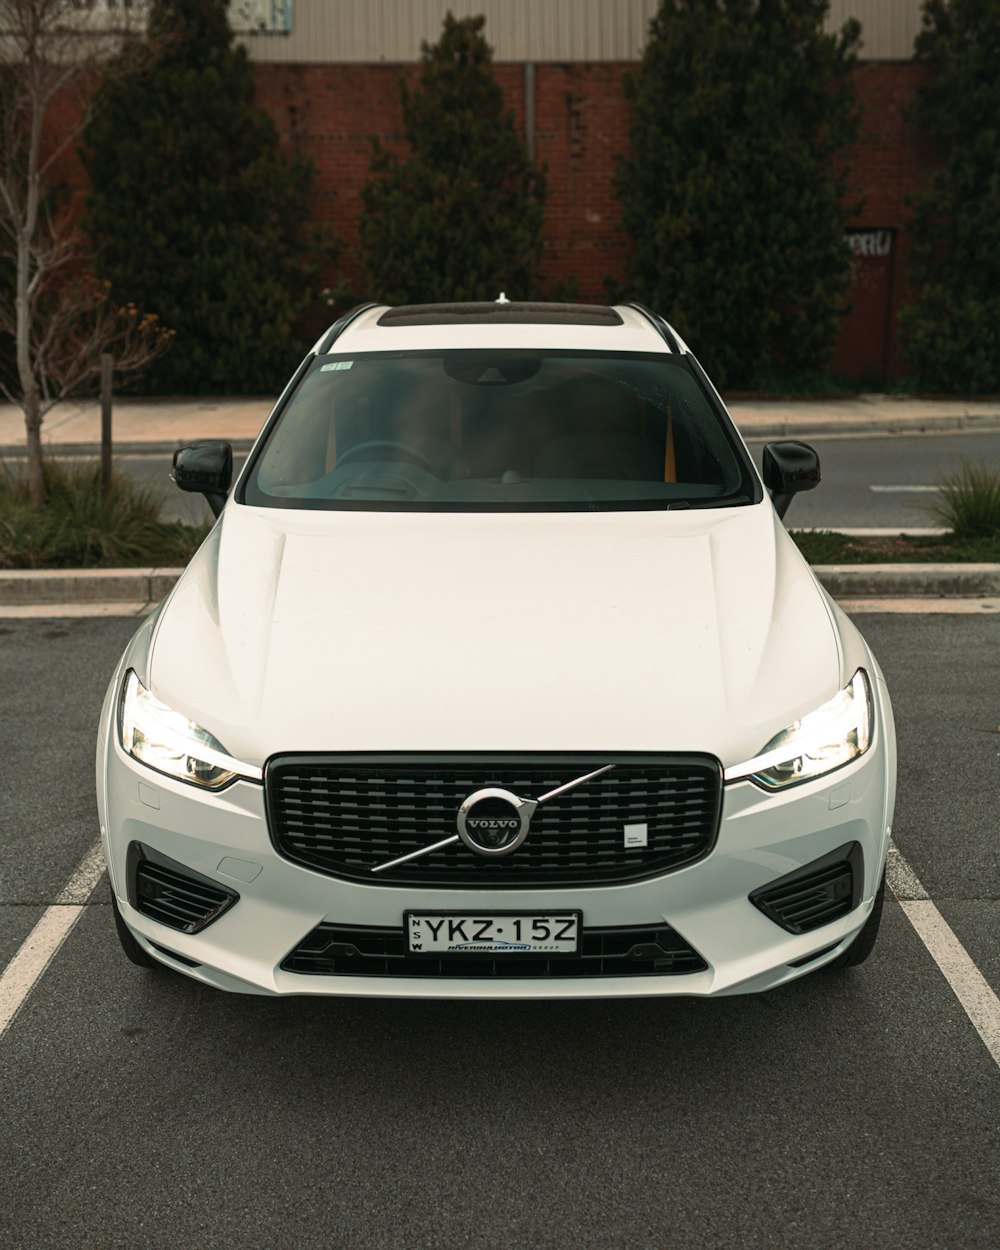 a white volvo car parked in a parking lot